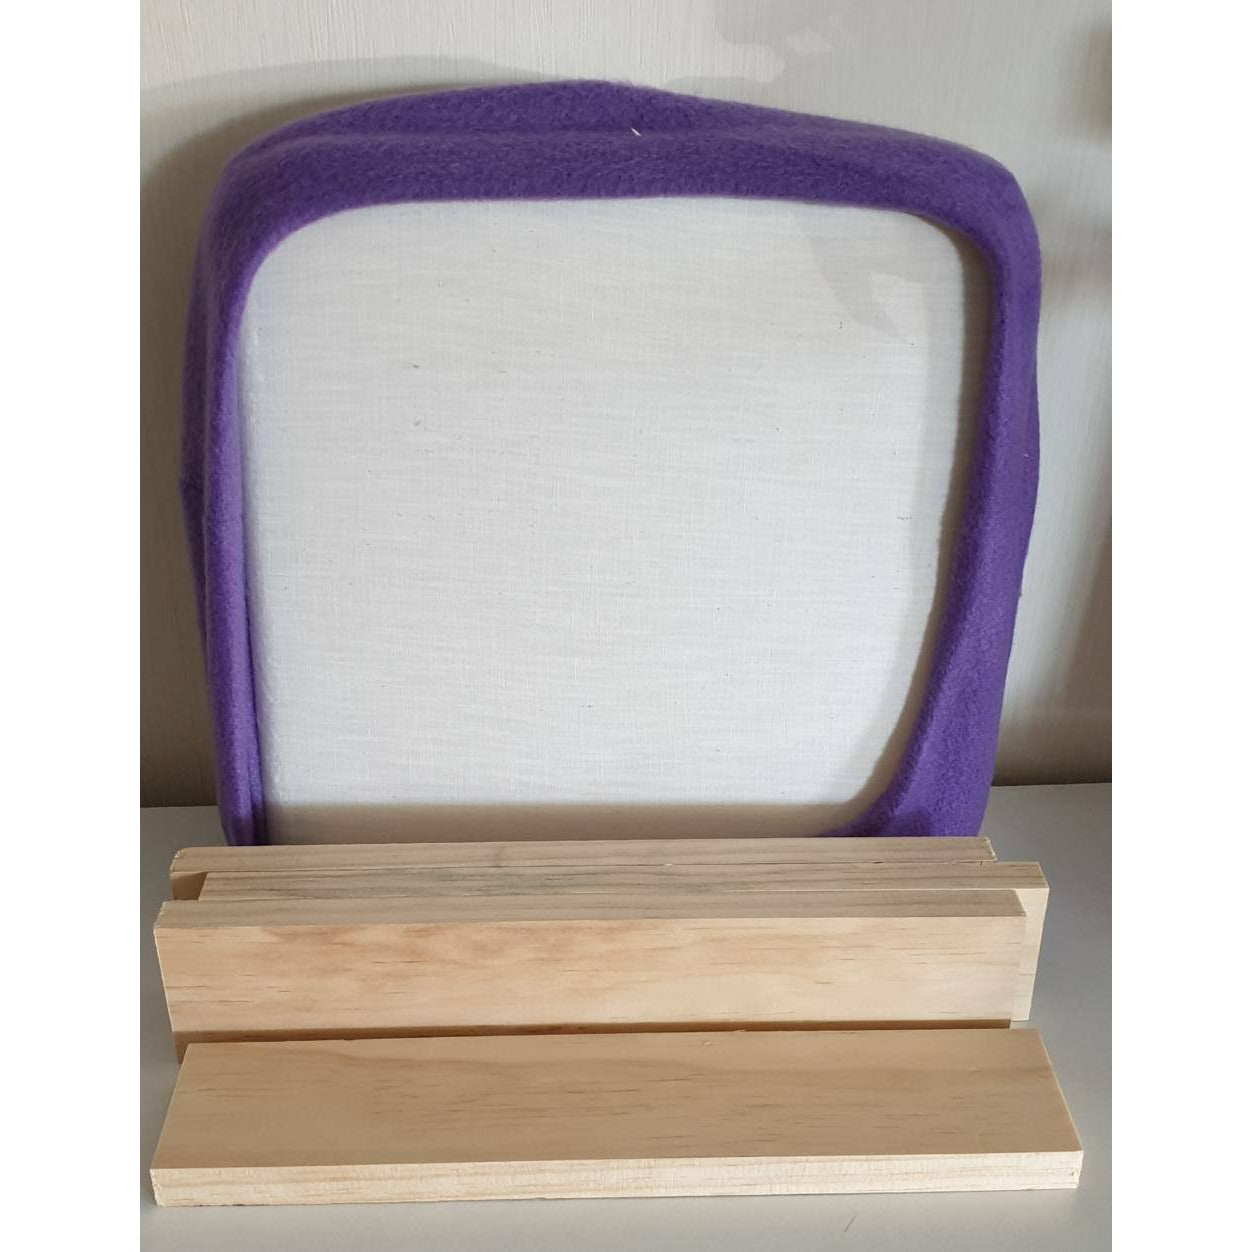  QULACO Cross Hoops and Frames,Wooden Gripper Strips for Punch  Needle Frame with Needle